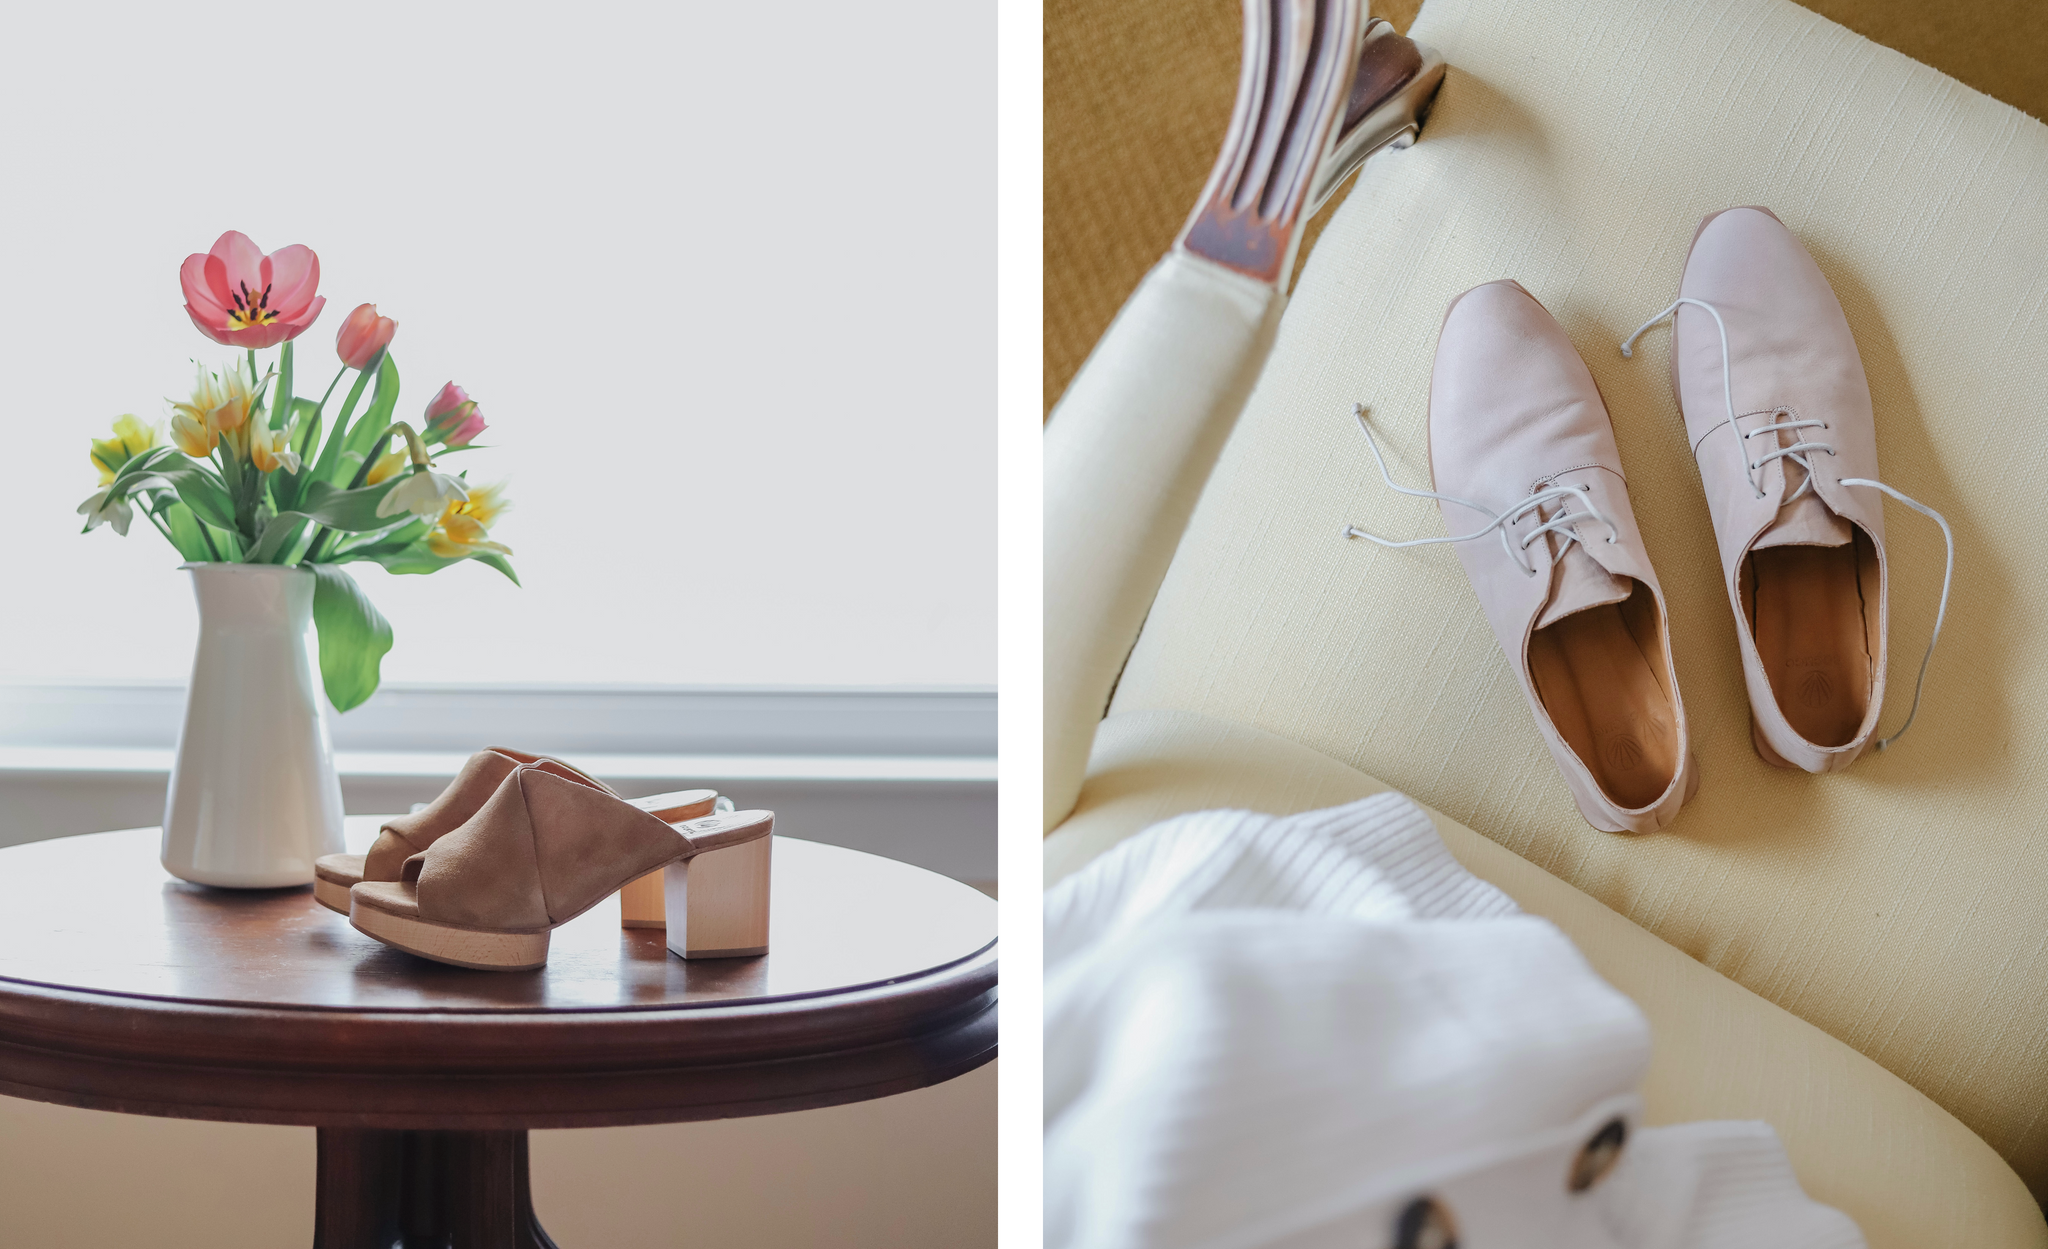 Two side-by-side images. (1) The Richie Clog placed on wooden side table with a lovely floral arrangement behind. (2) Top view of the Holmes Flat unlaced, posed on a chair.